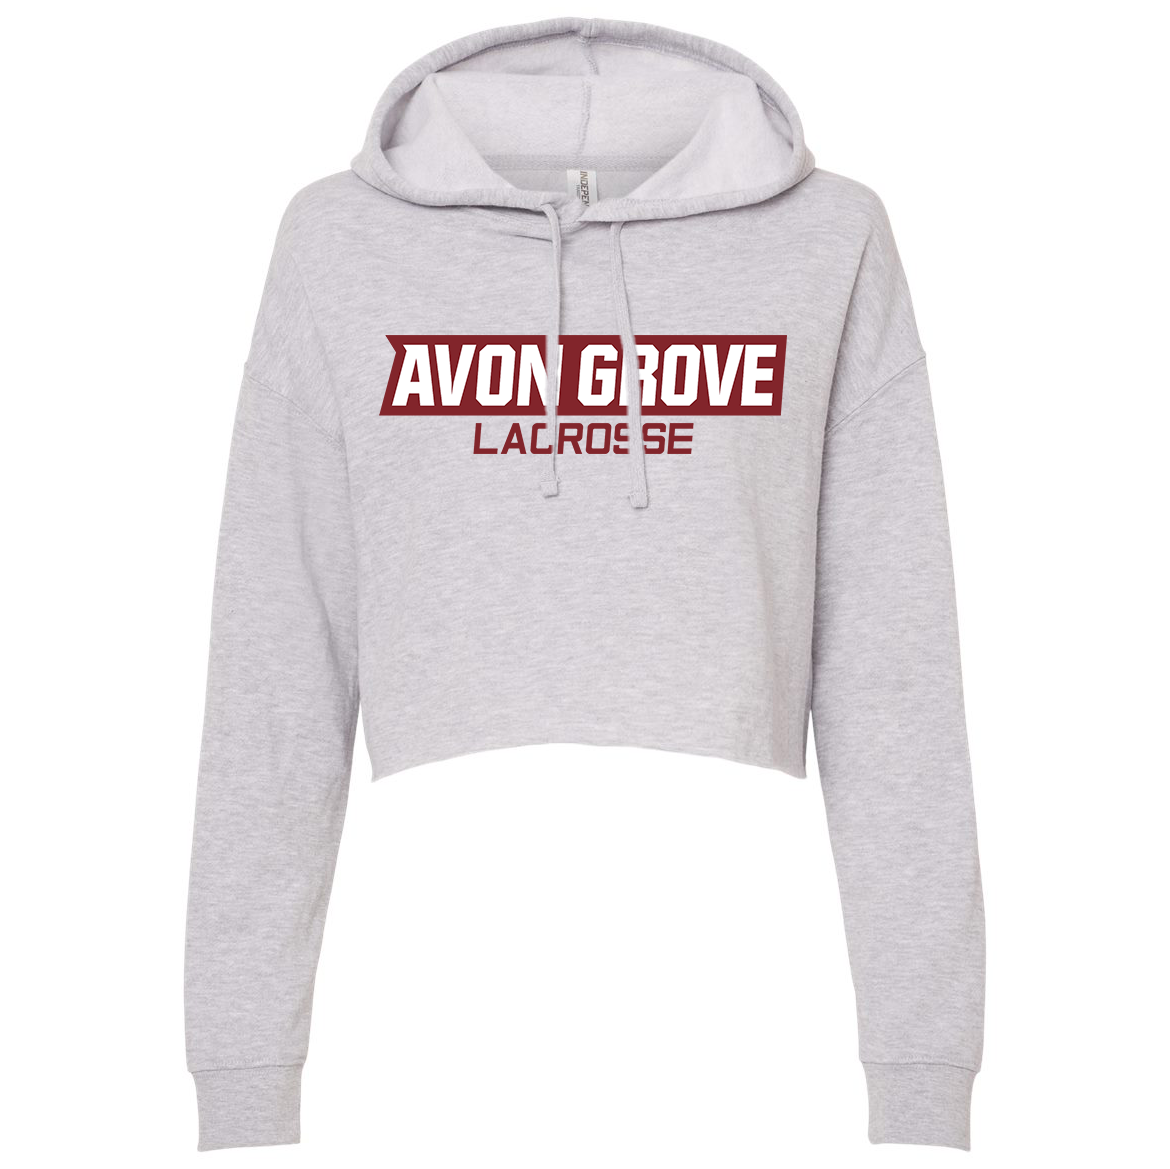 Avon Grove Lacrosse Independent Trading Co. Women’s Lightweight Cropped Hooded Sweatshirt